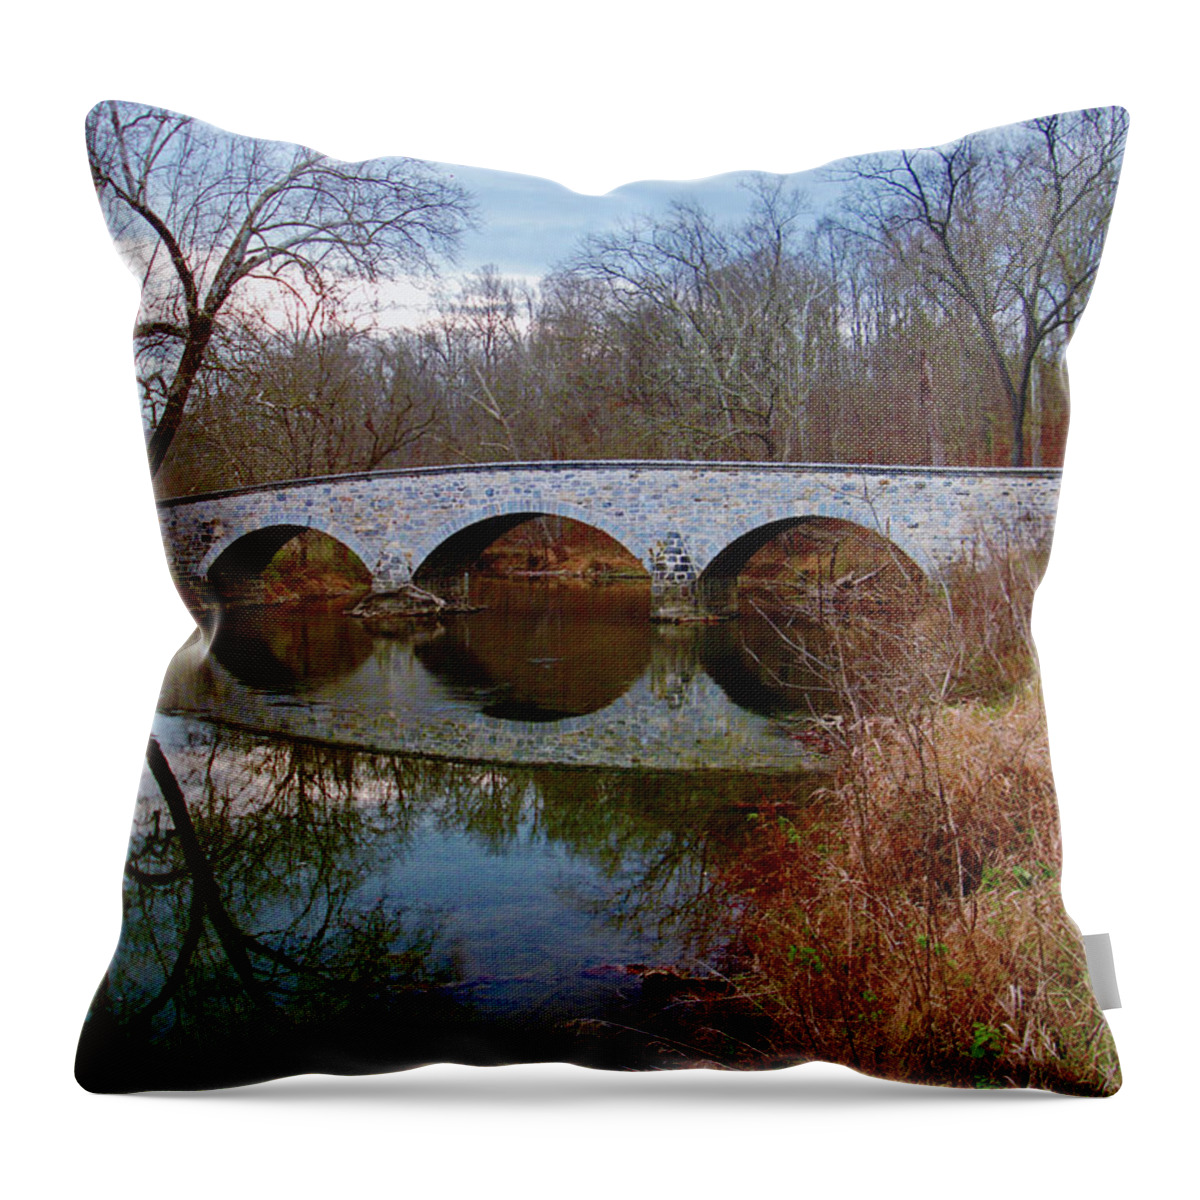 Photo Designs By Suzanne Stout Throw Pillow featuring the photograph Burnside Bridge by Suzanne Stout